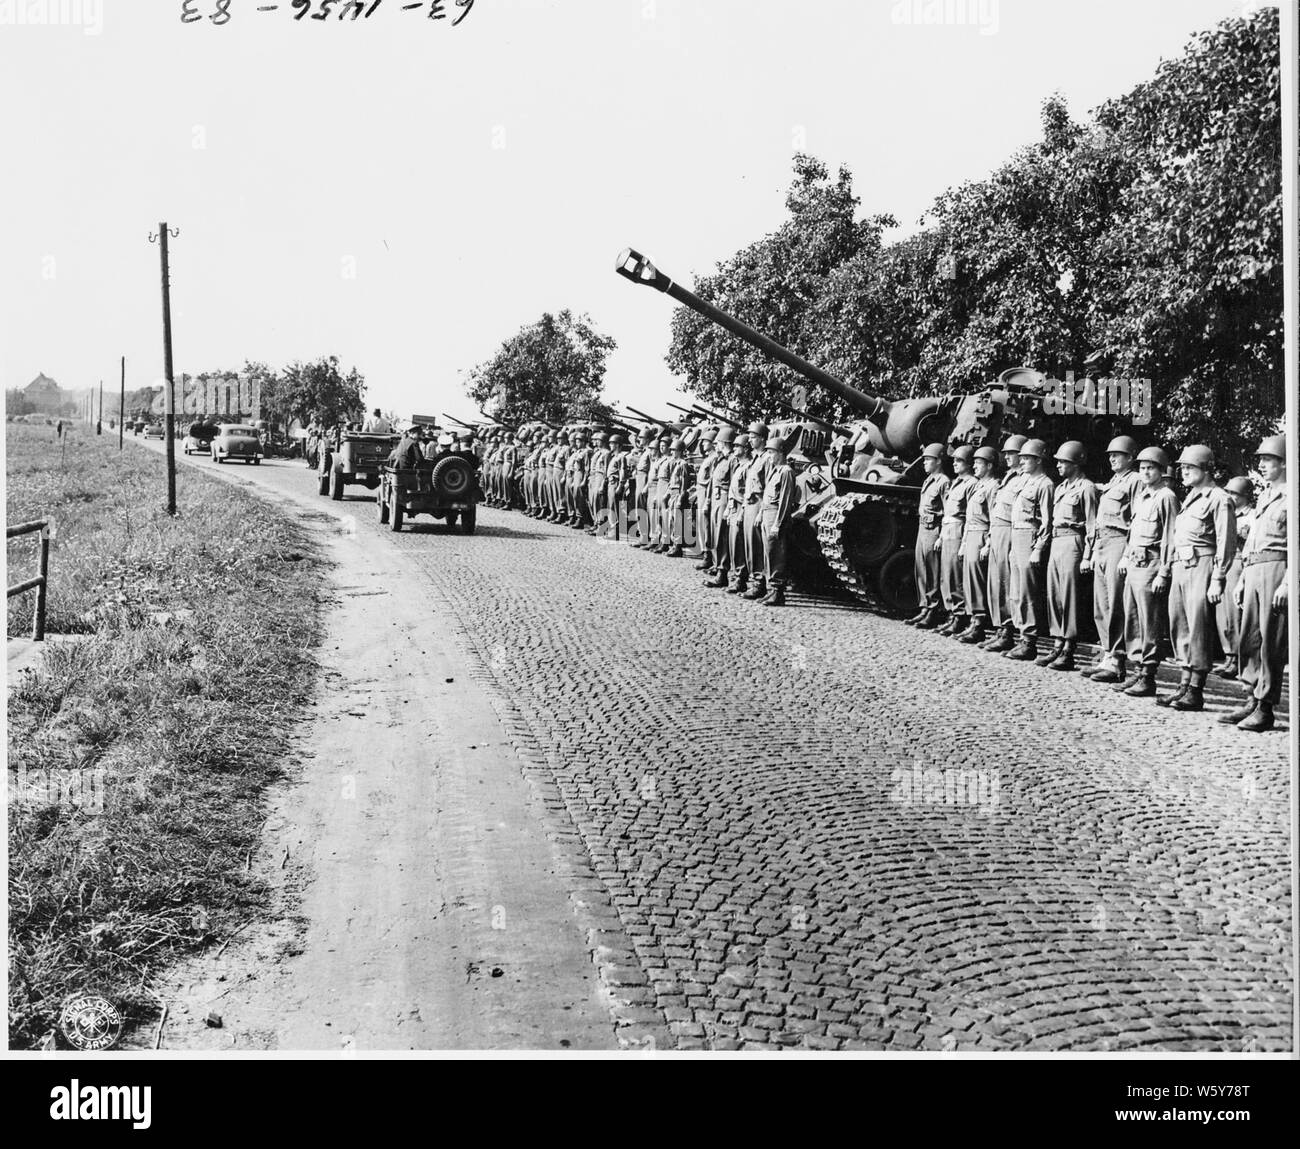 Tanks and men of the 3rd Armored Division, 23rd Corps, Seventh Army, line a highway as President Harry S. Truman passes by in his sedan during his visit to inspect troops at Neuisenburg, Germany. President Truman has just left the Potsdam Conference for a quick tour of the American occupied area. Stock Photo